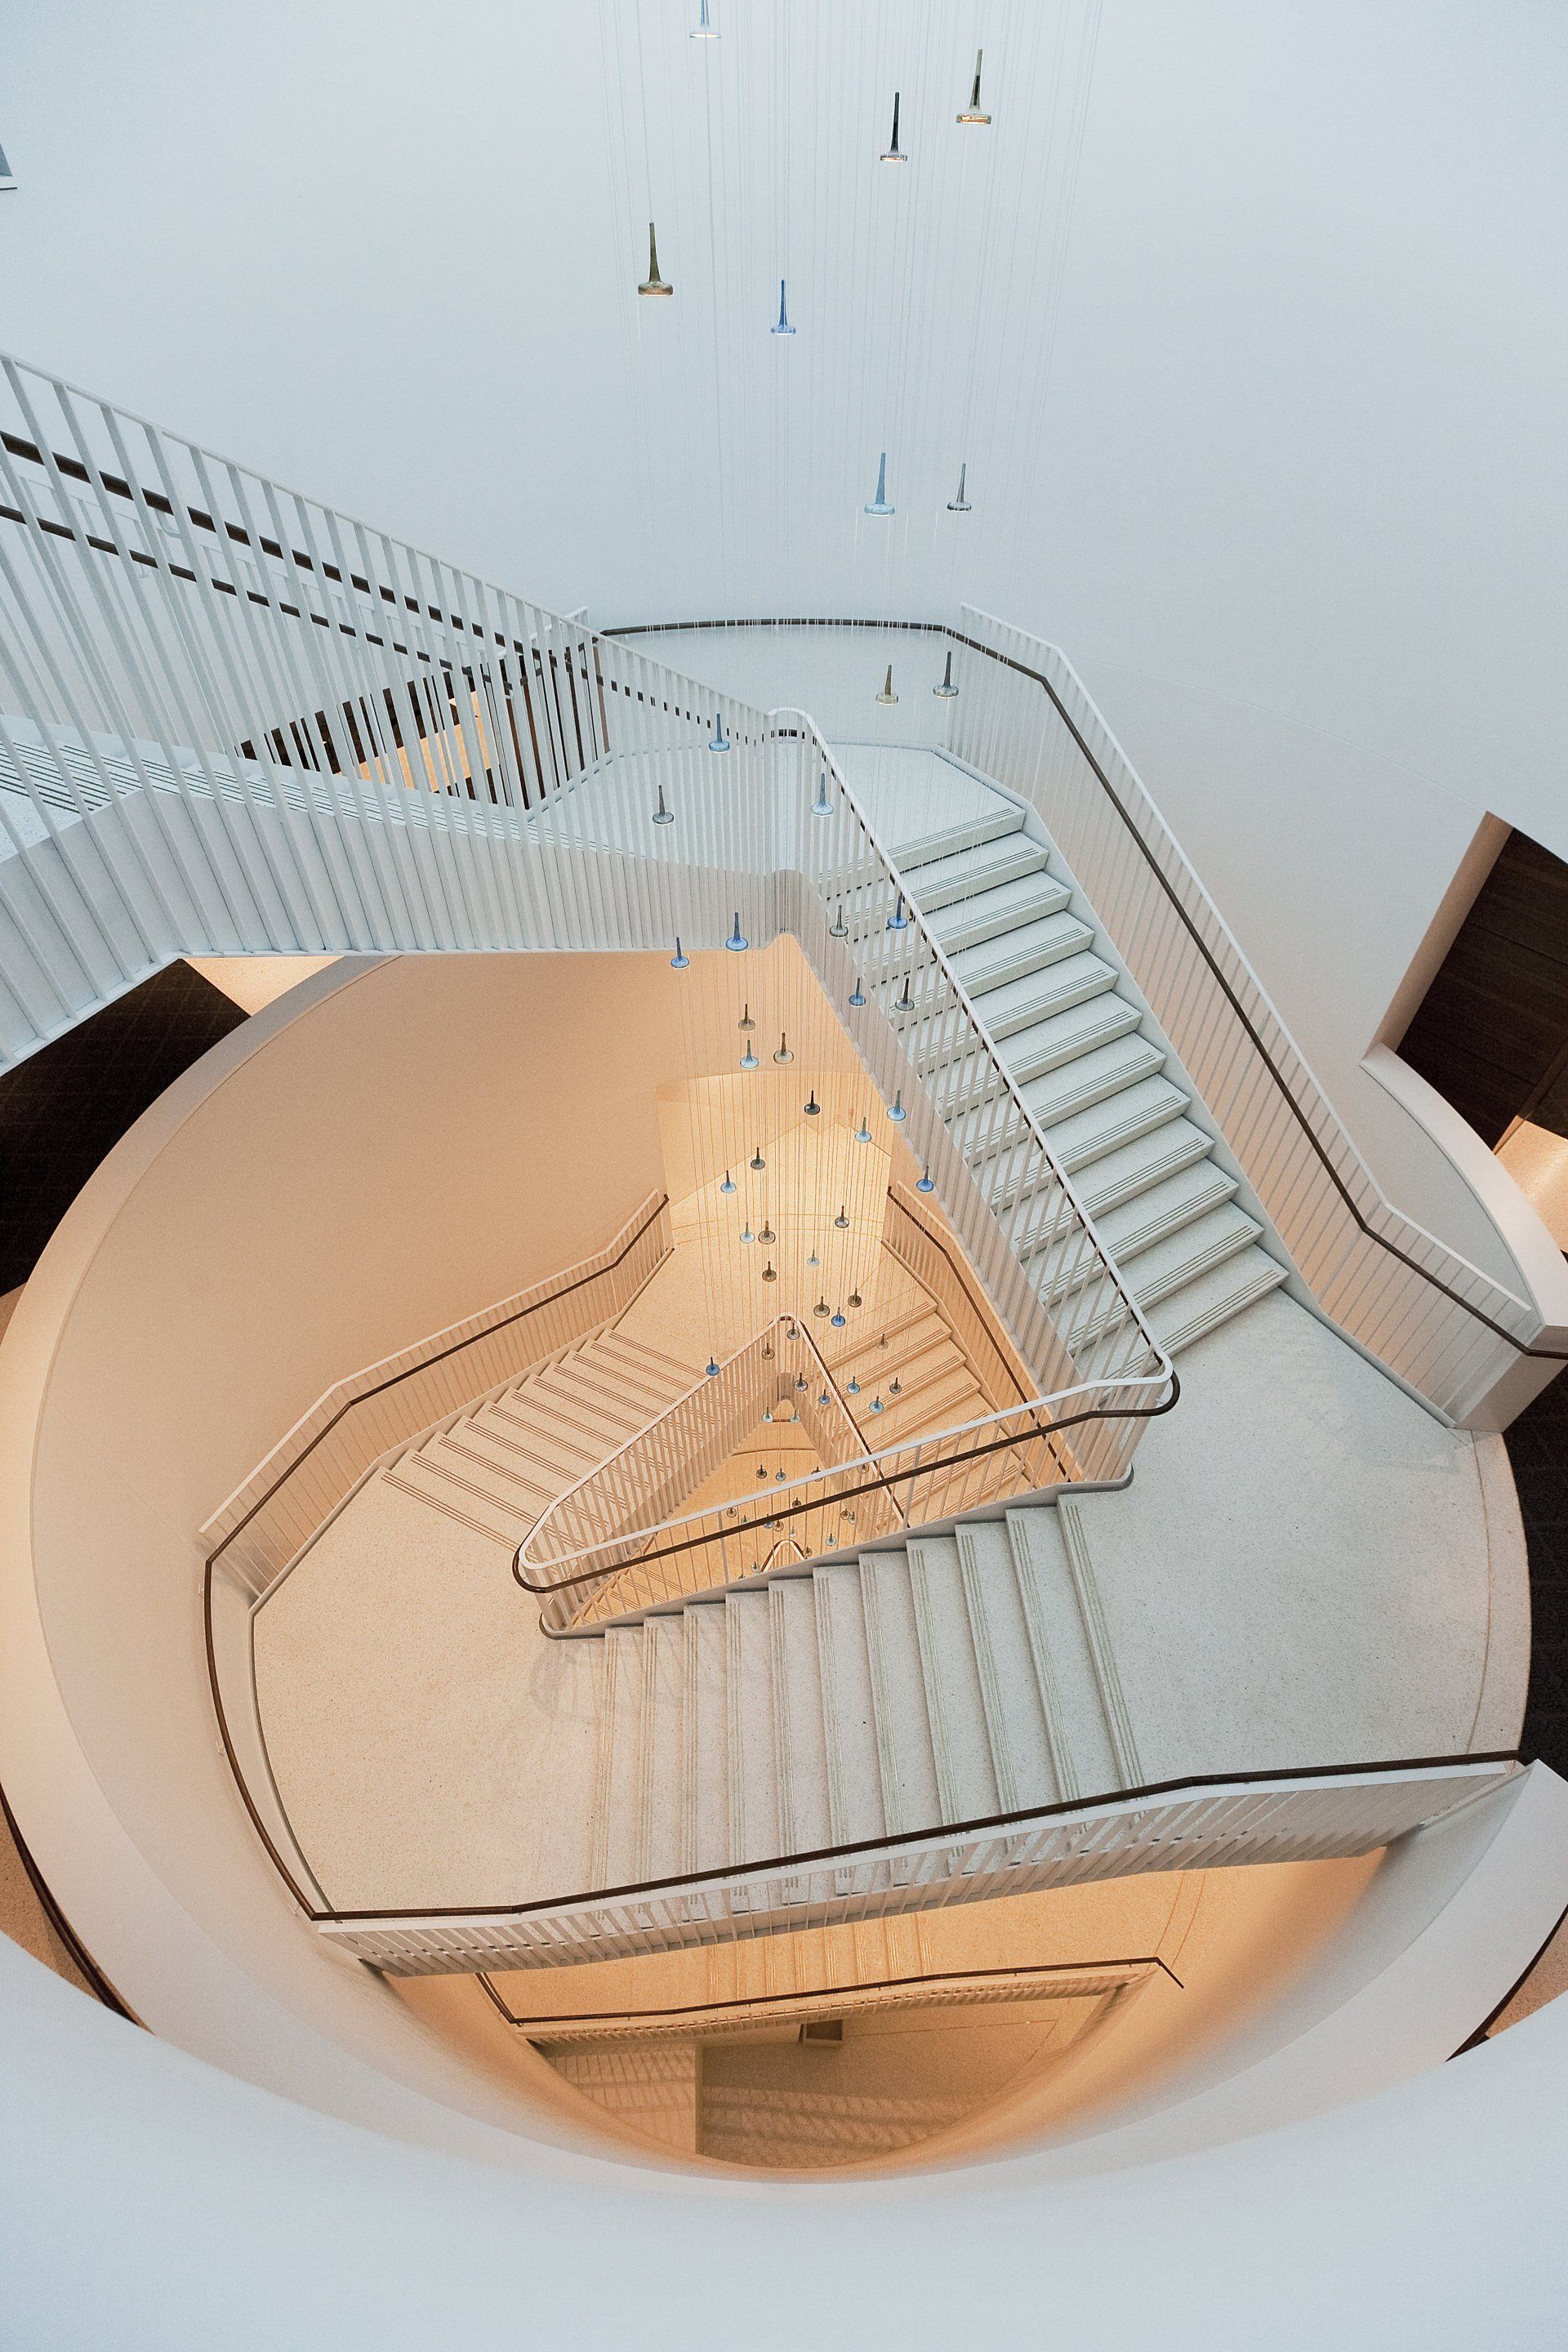 An aerial view of a spiral staircase with a chandelier hanging from the ceiling.